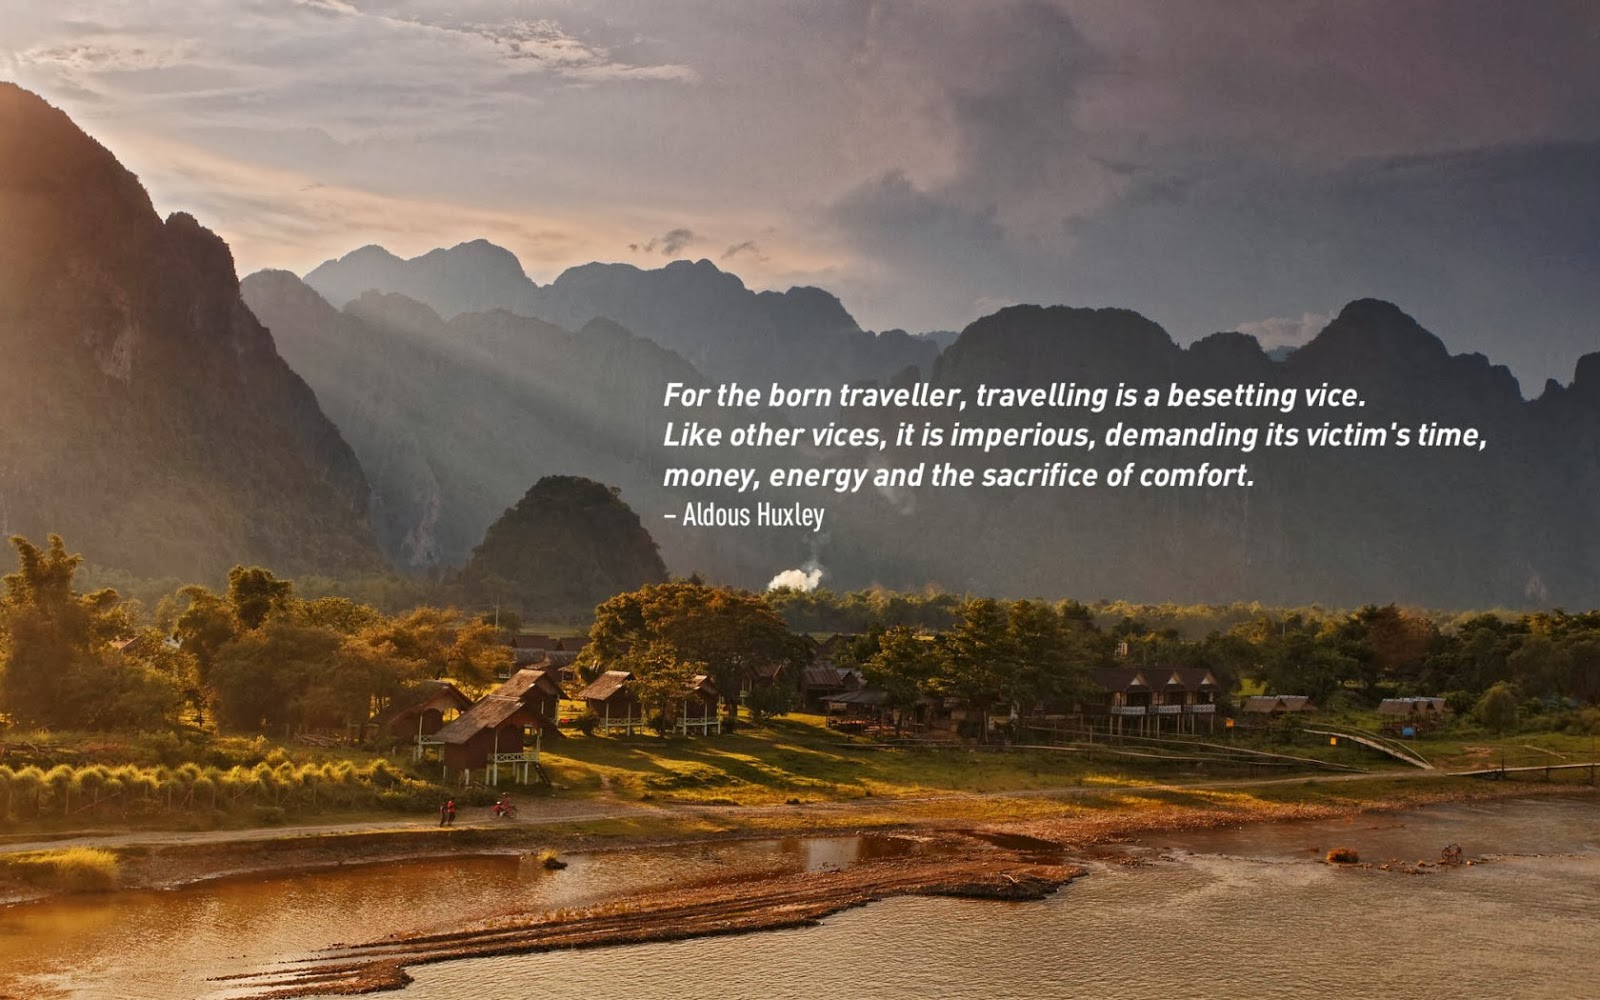 Travel Quotes By Famous People. QuotesGram